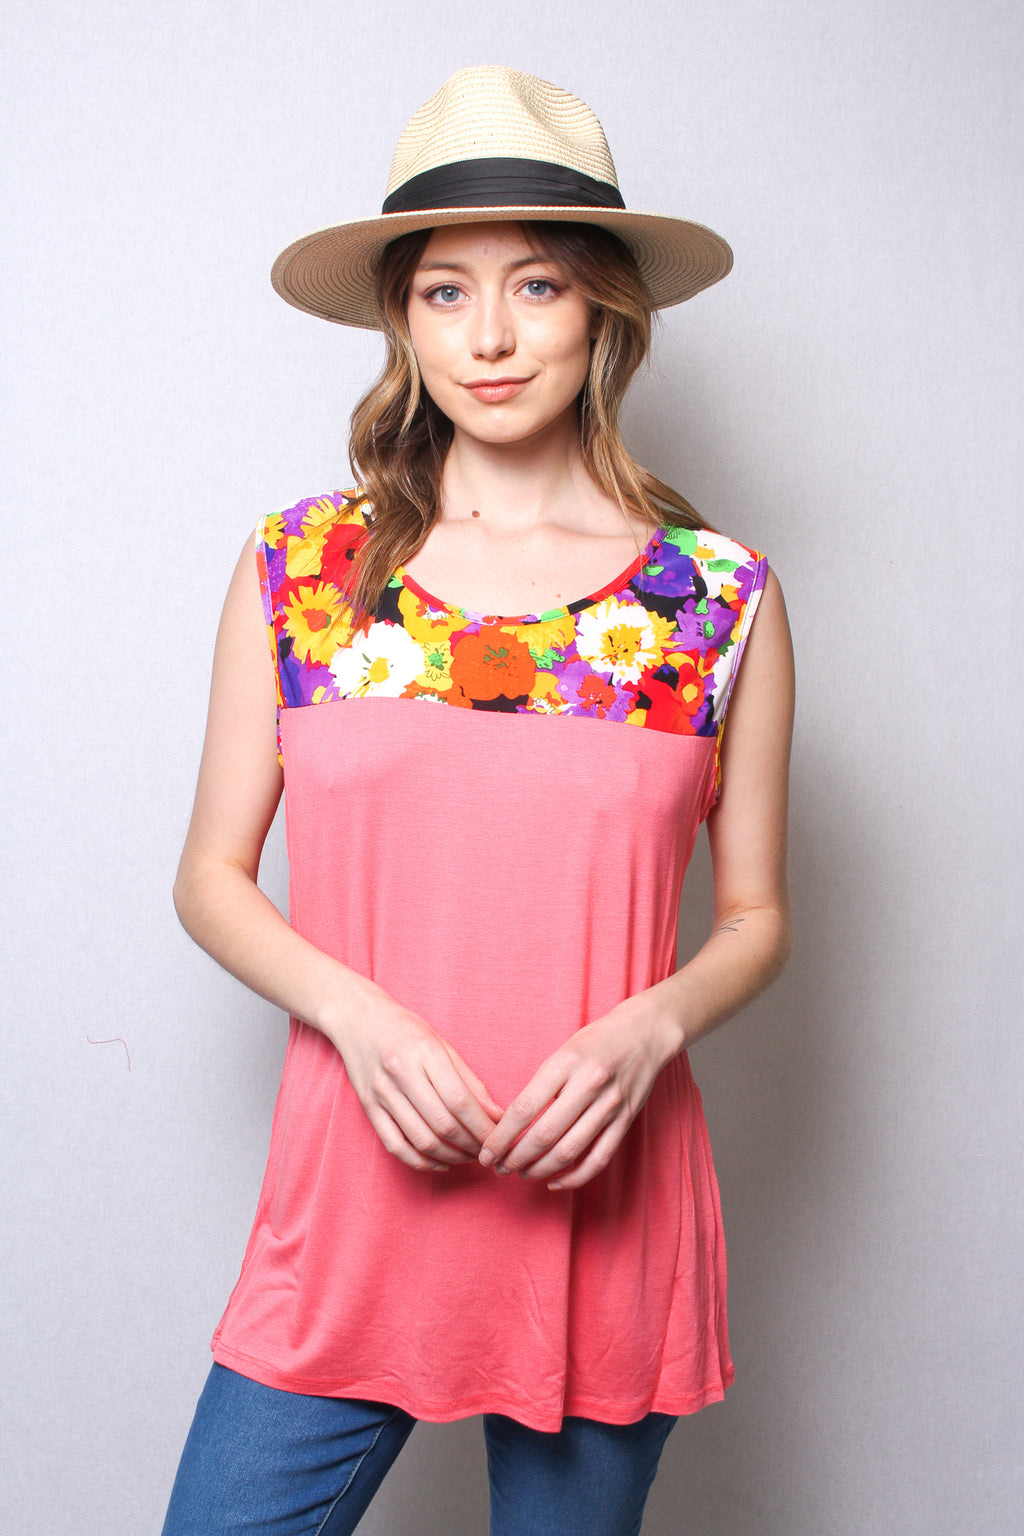 Women's Sleeveless Top with Floral Print Design